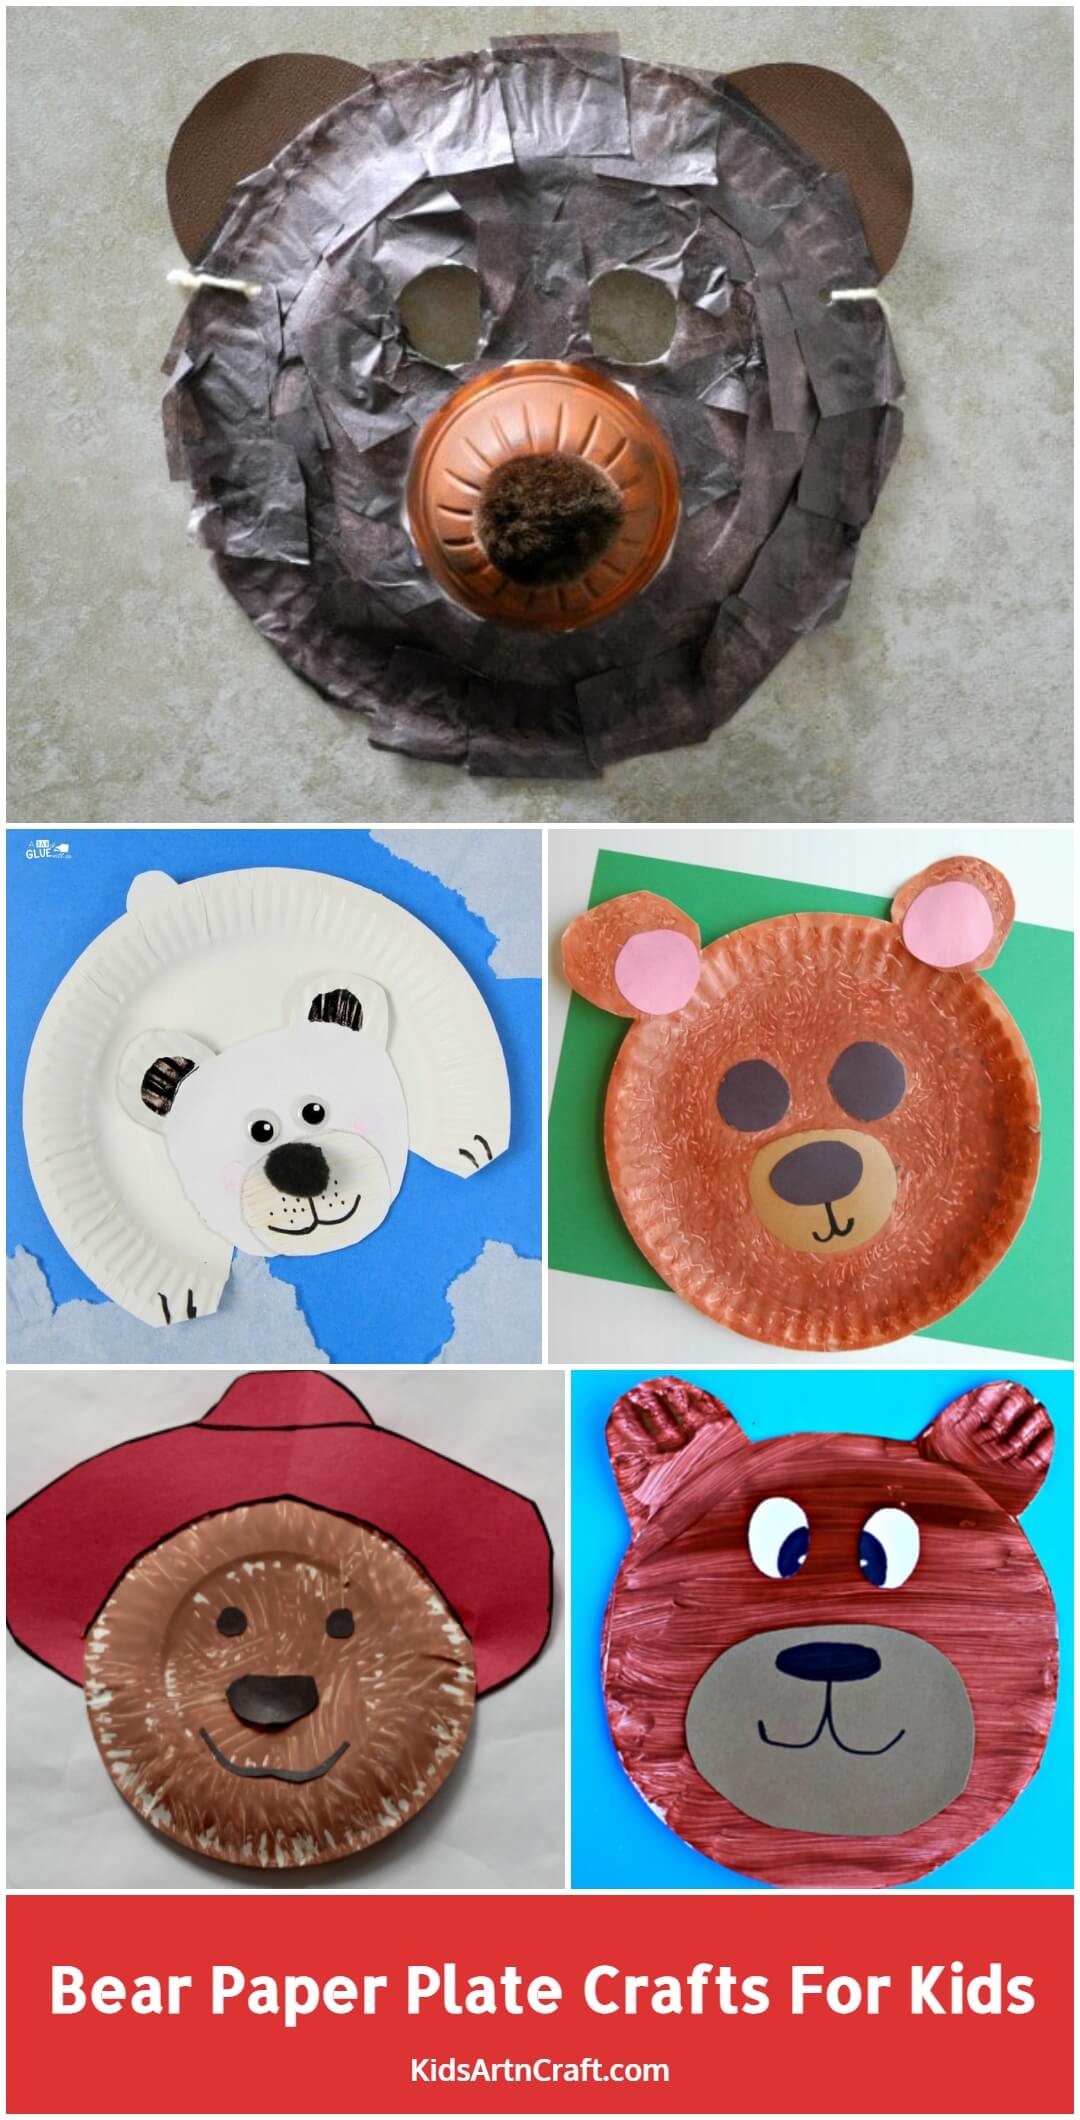 Bear Paper Plate Crafts for Kids